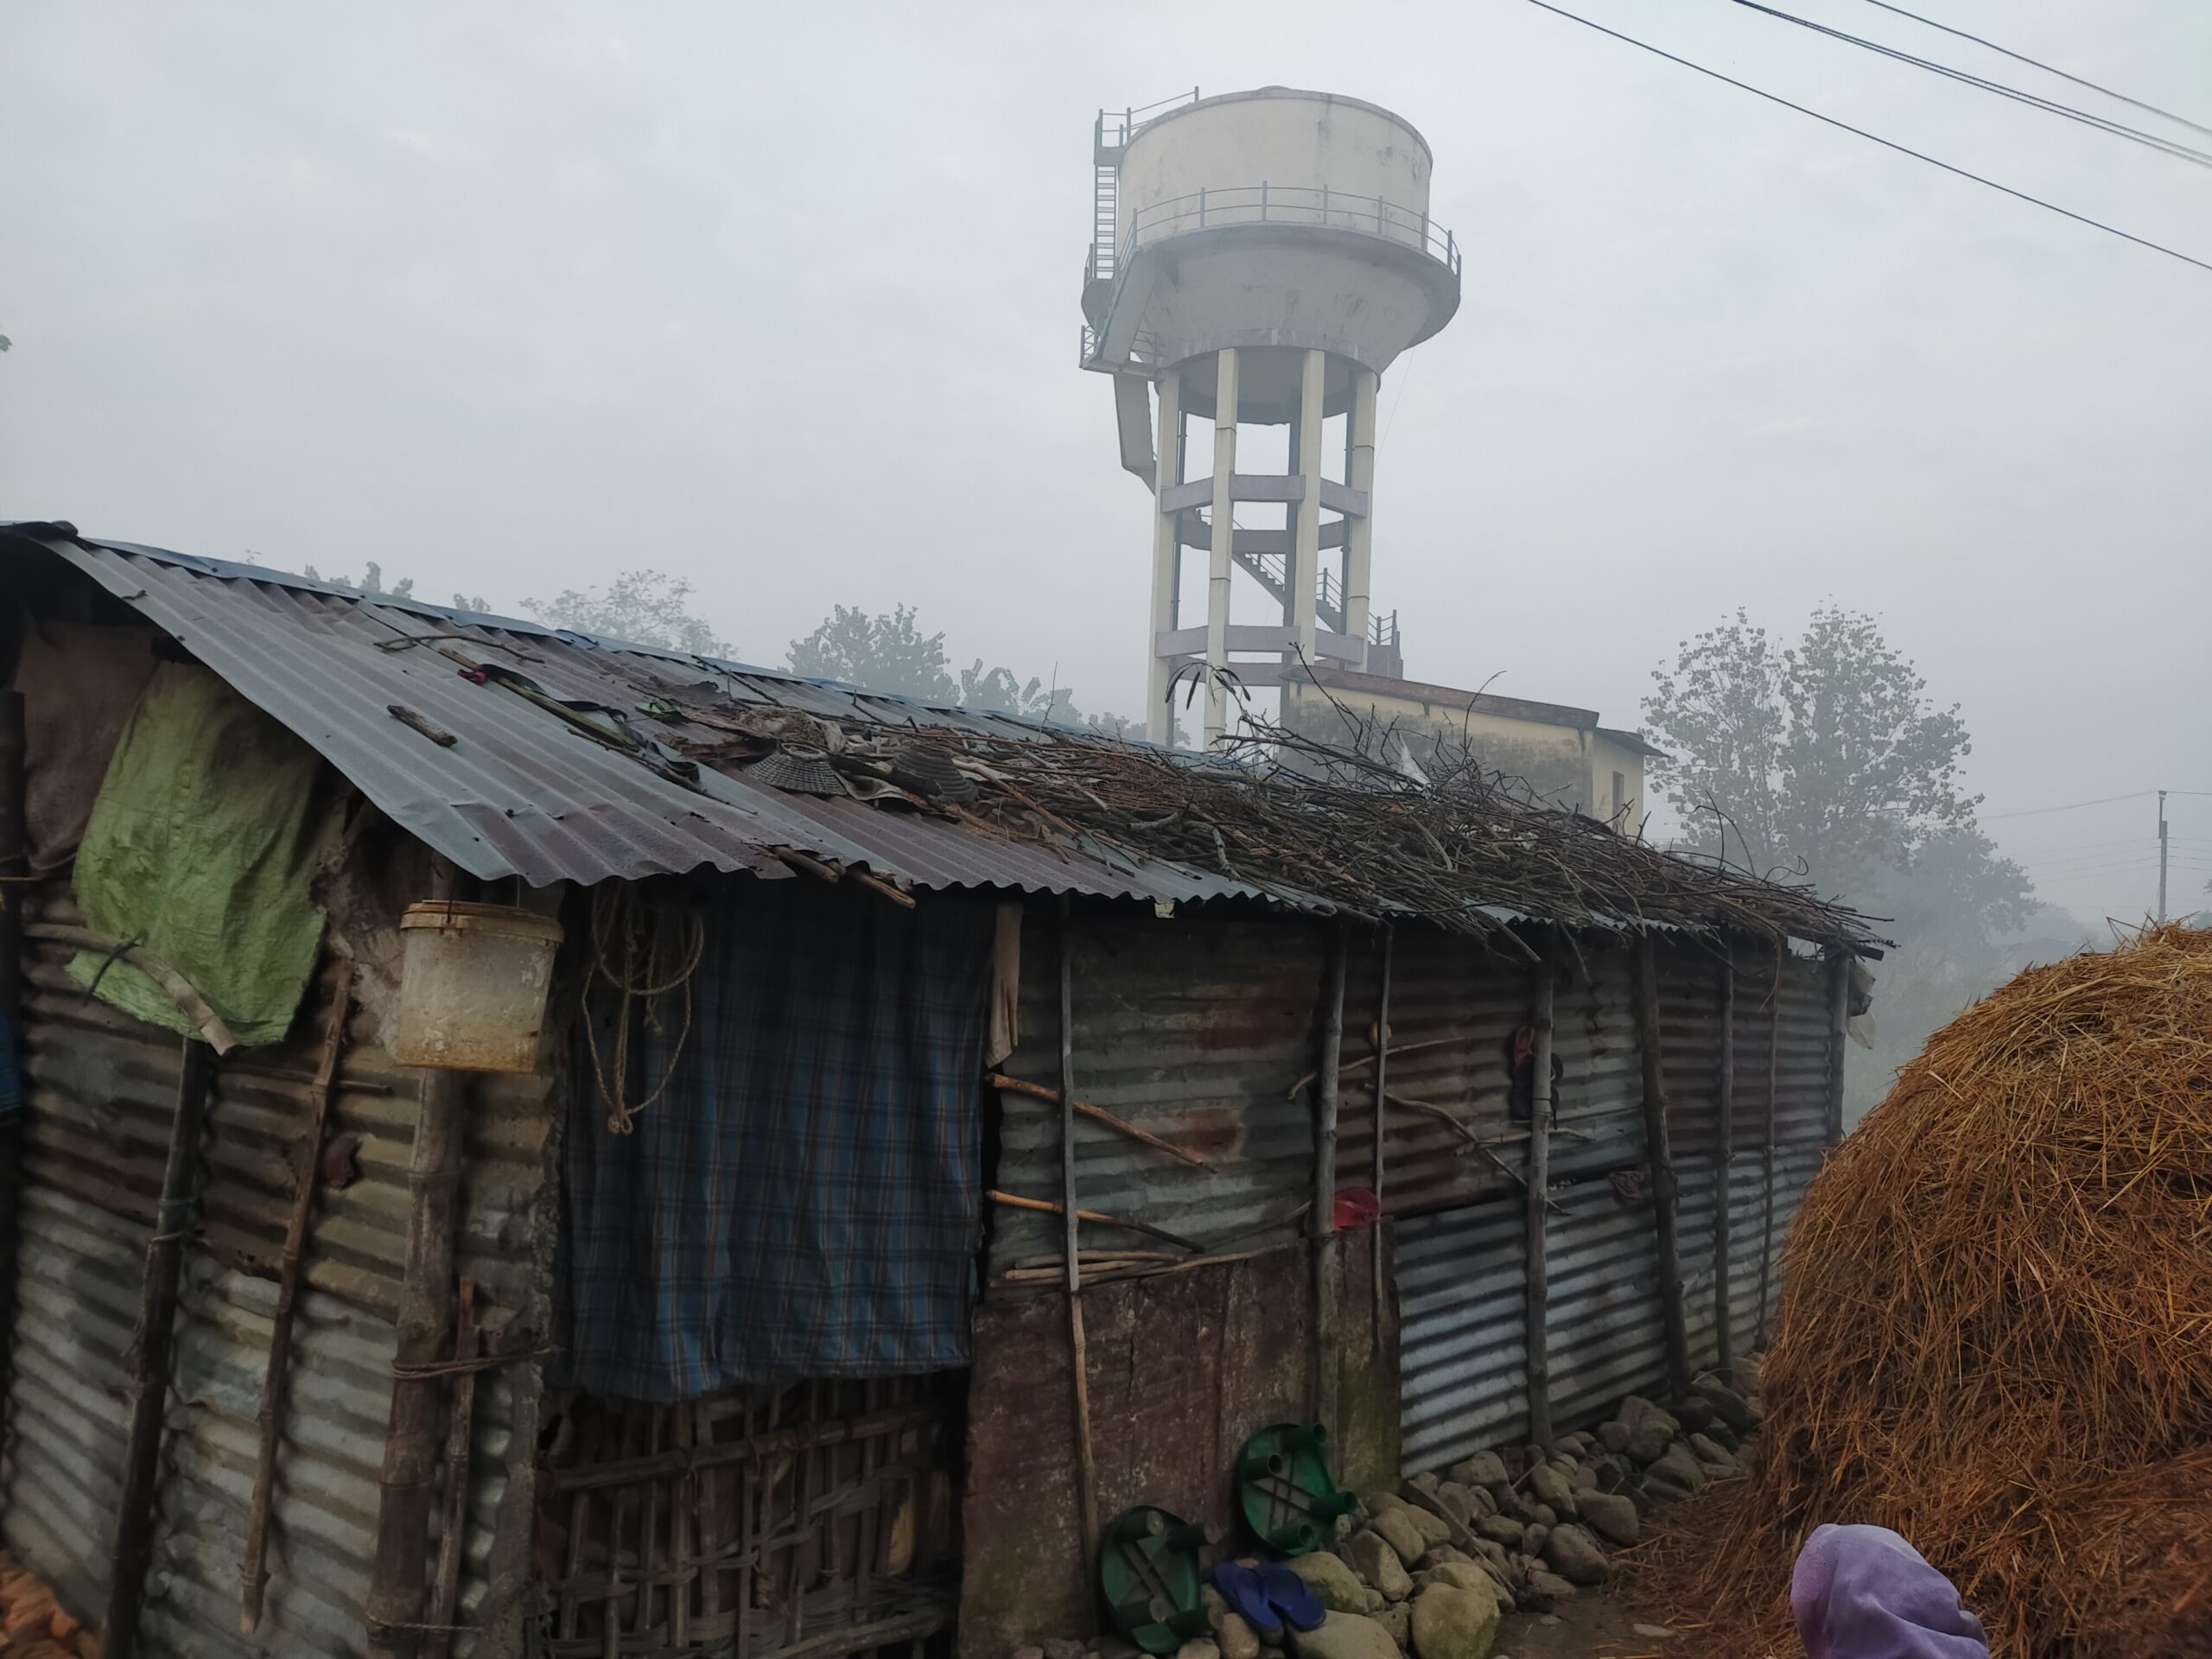 A poorly assembled house made of sheet metal, branches, stones and cloth. There are electrical wires above the house. Further in the background, a plastic silo and trees can be seen. The setting is foggy.